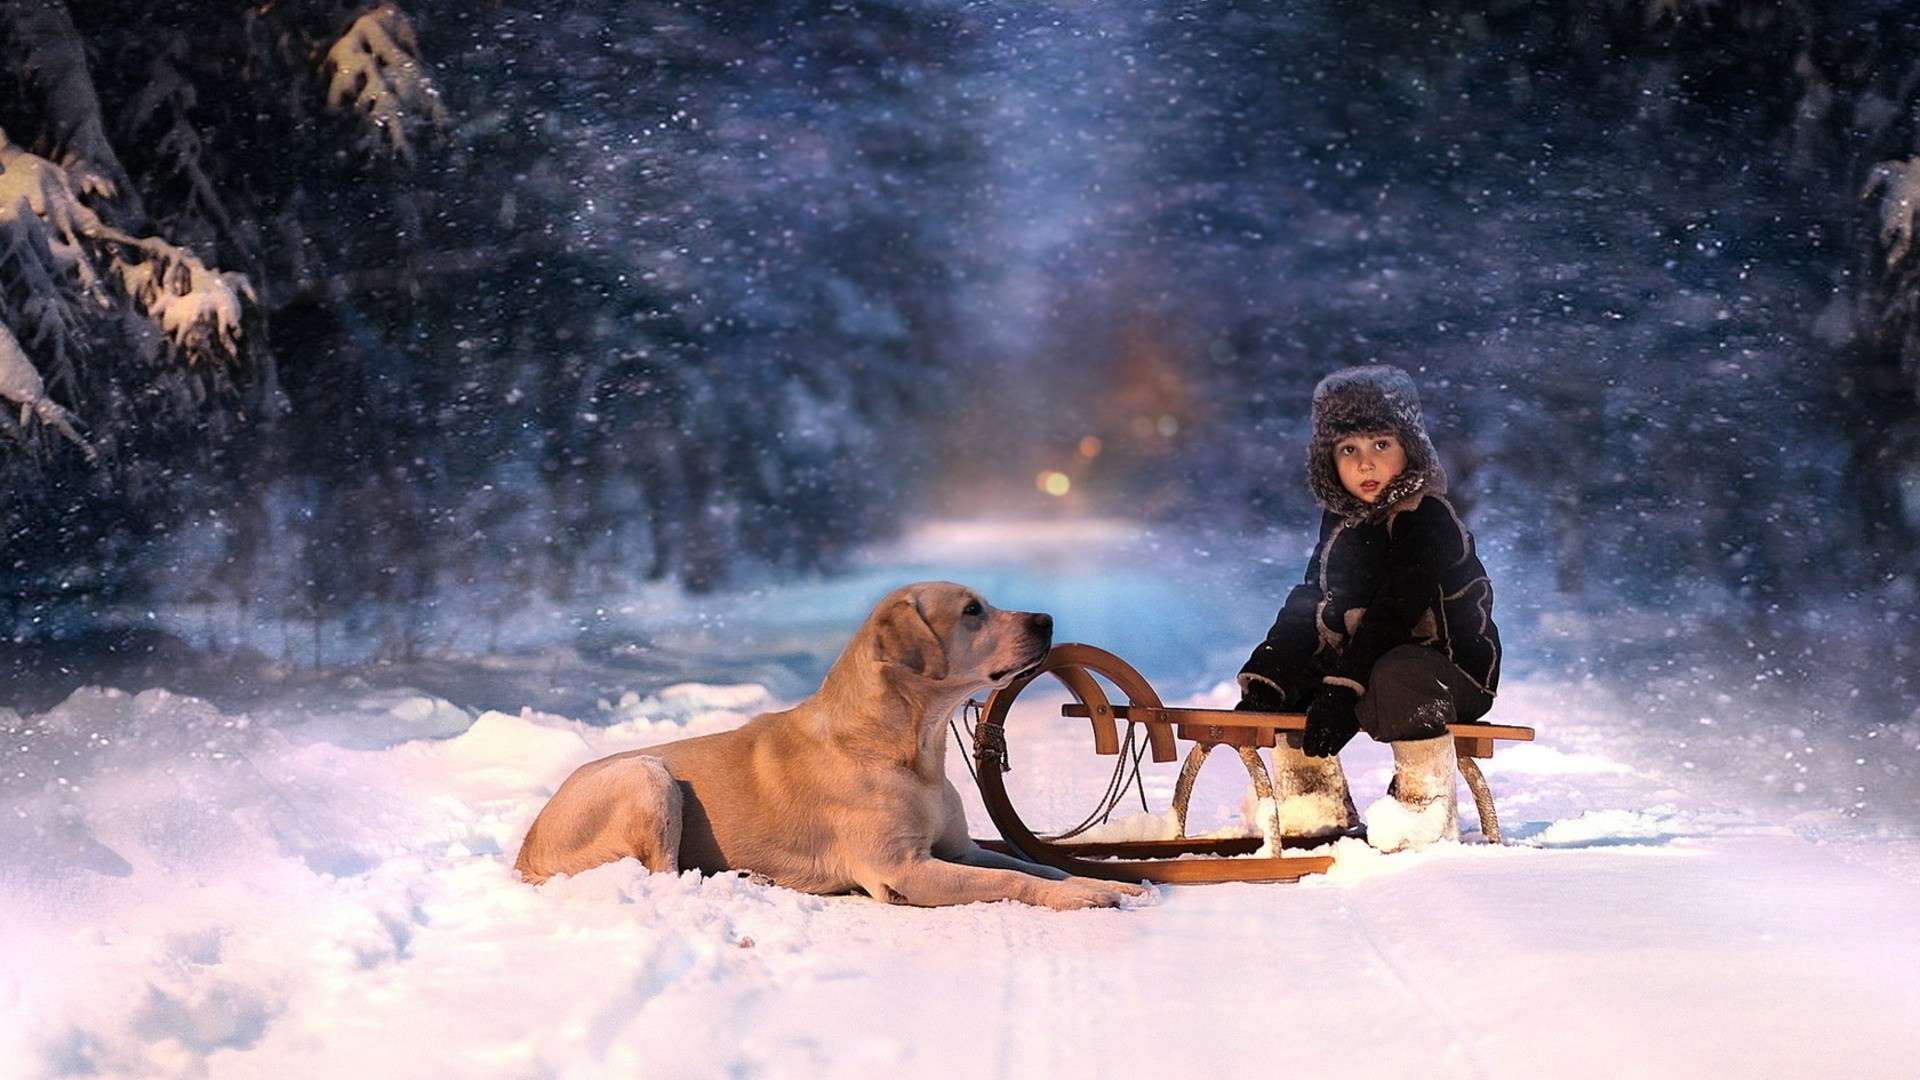 holidays, Christmas, Winter, Snow, Seasons, Seasonal, Roads, Snowing, Snowflakes, Trees, Forest, Night, Lights, Animals, Dogs, Children, Mood, Fun, Sled, Vehicles, Friends, Love, Scenic, Photography Wallpaper